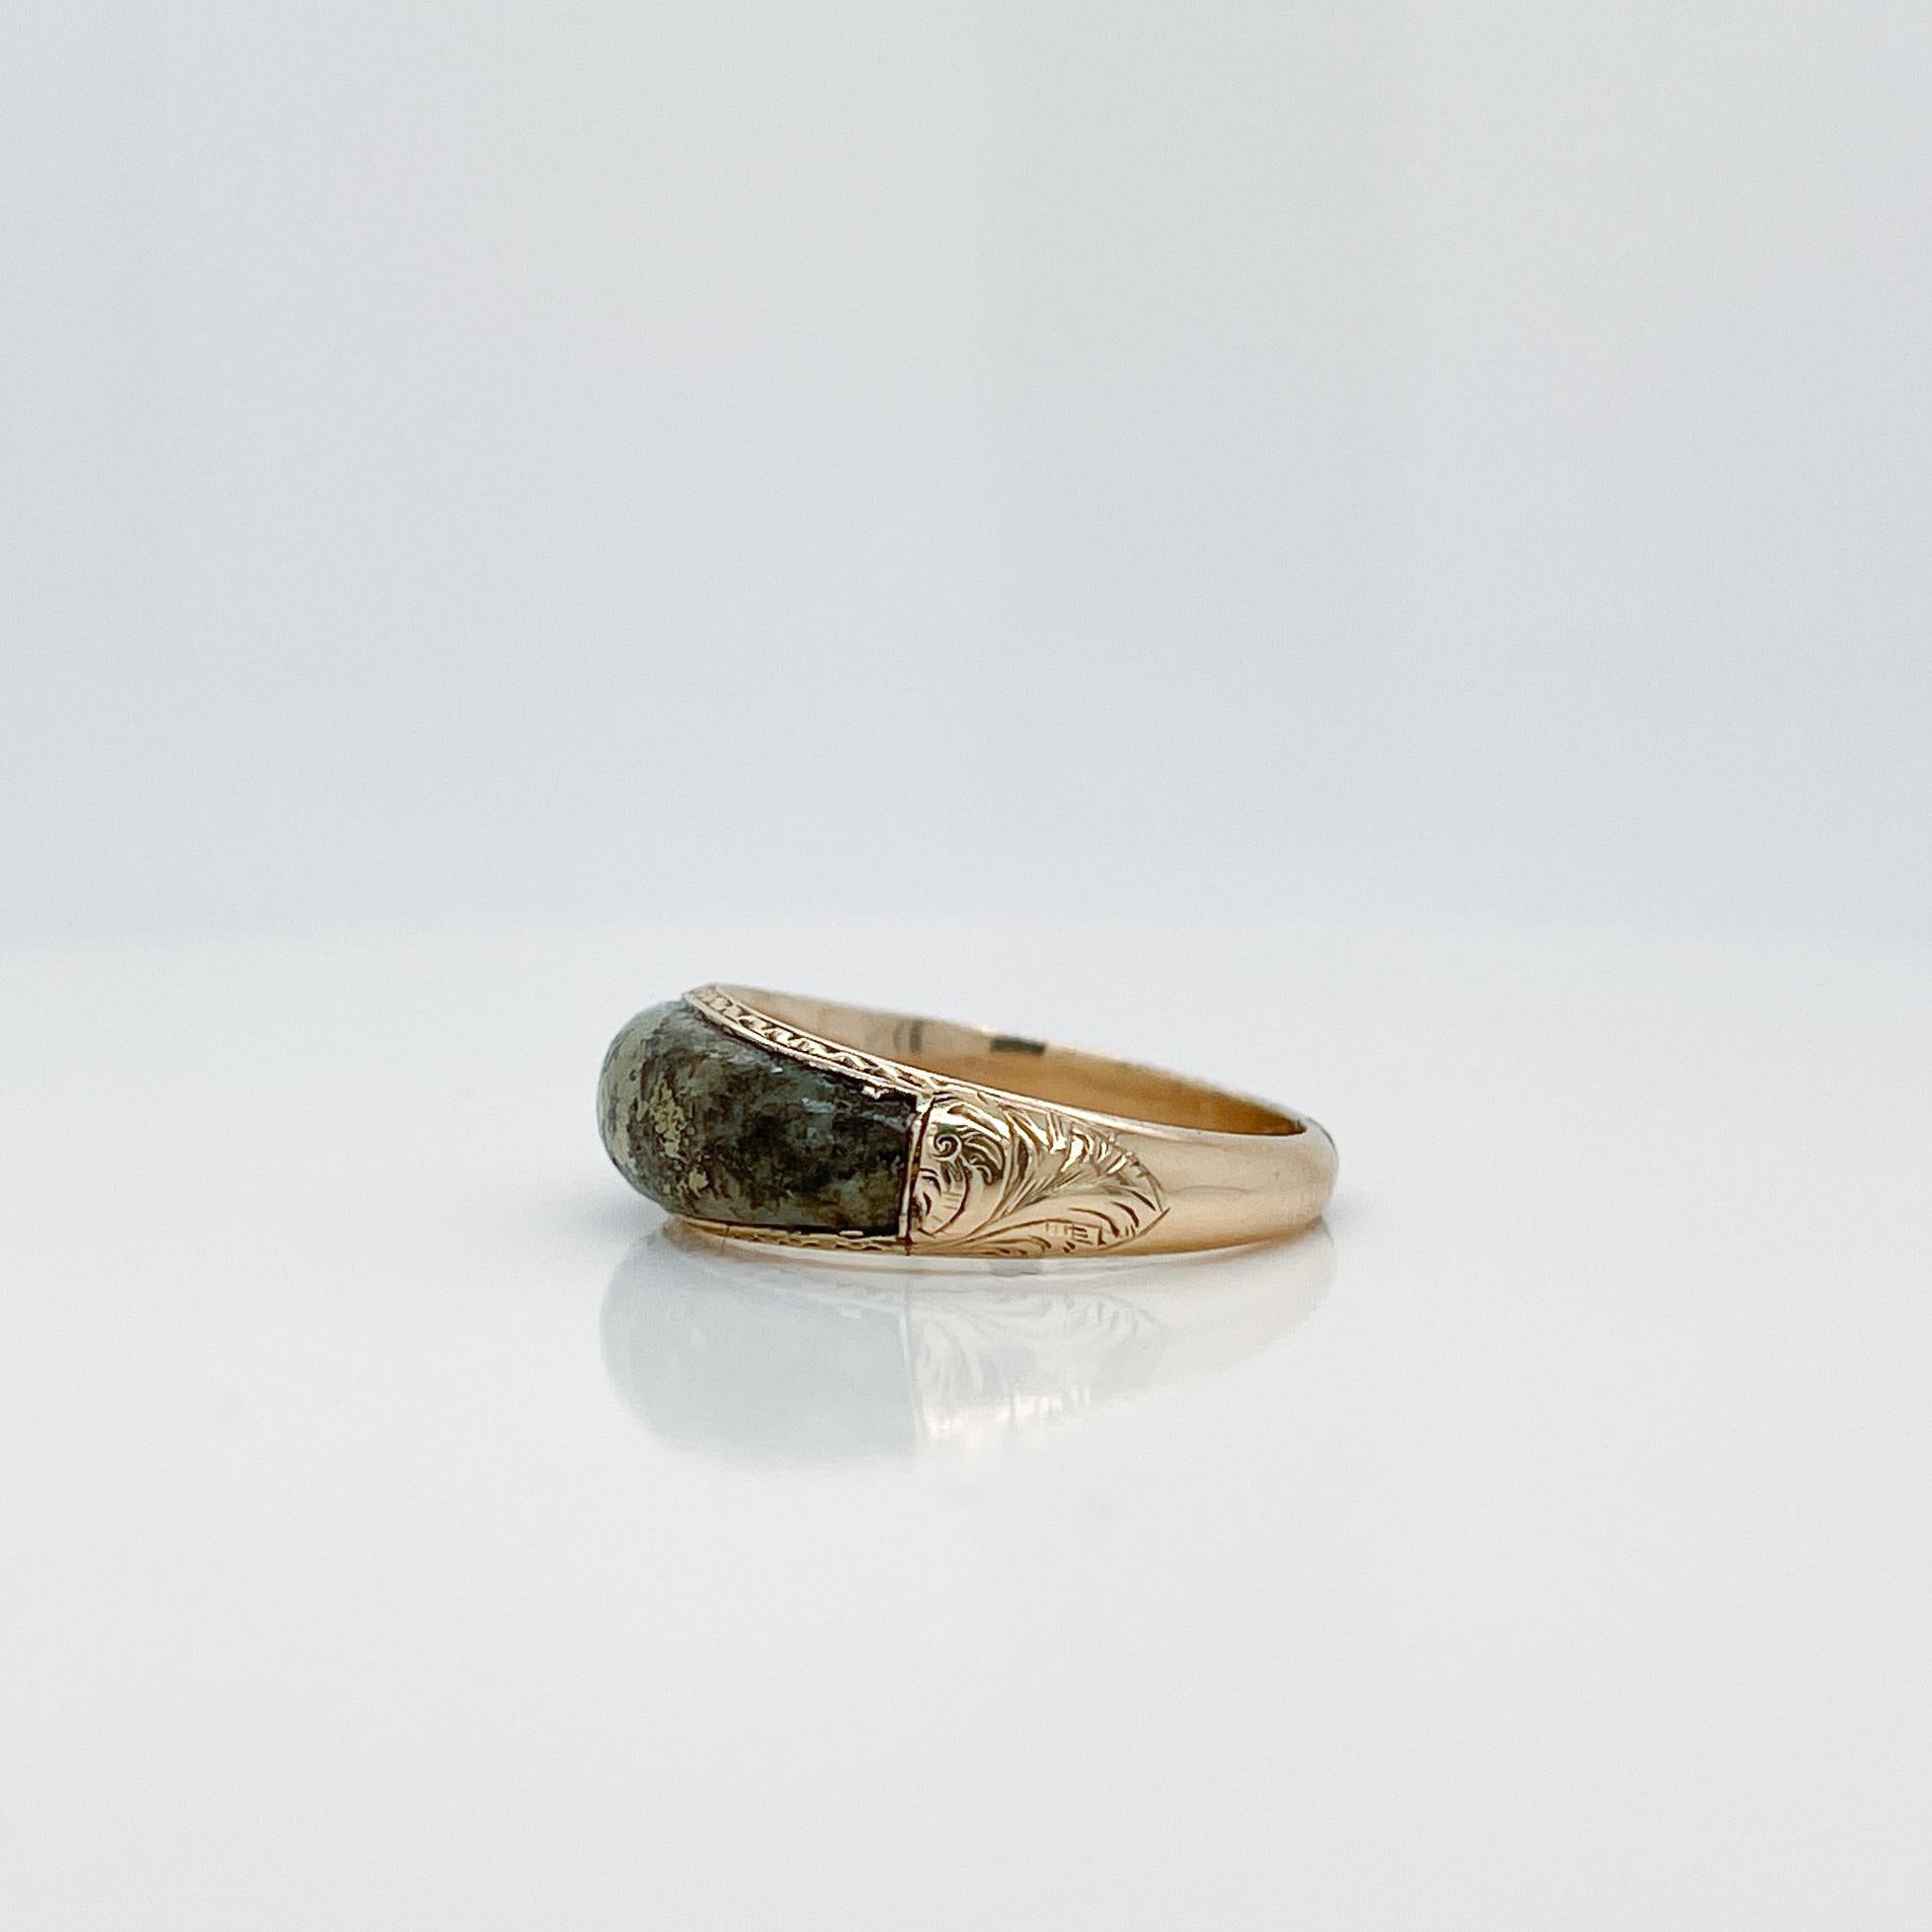 Antique Victorian 14K Gold & Pyrite or Gold Quartz Signet / Band Ring In Good Condition For Sale In Philadelphia, PA